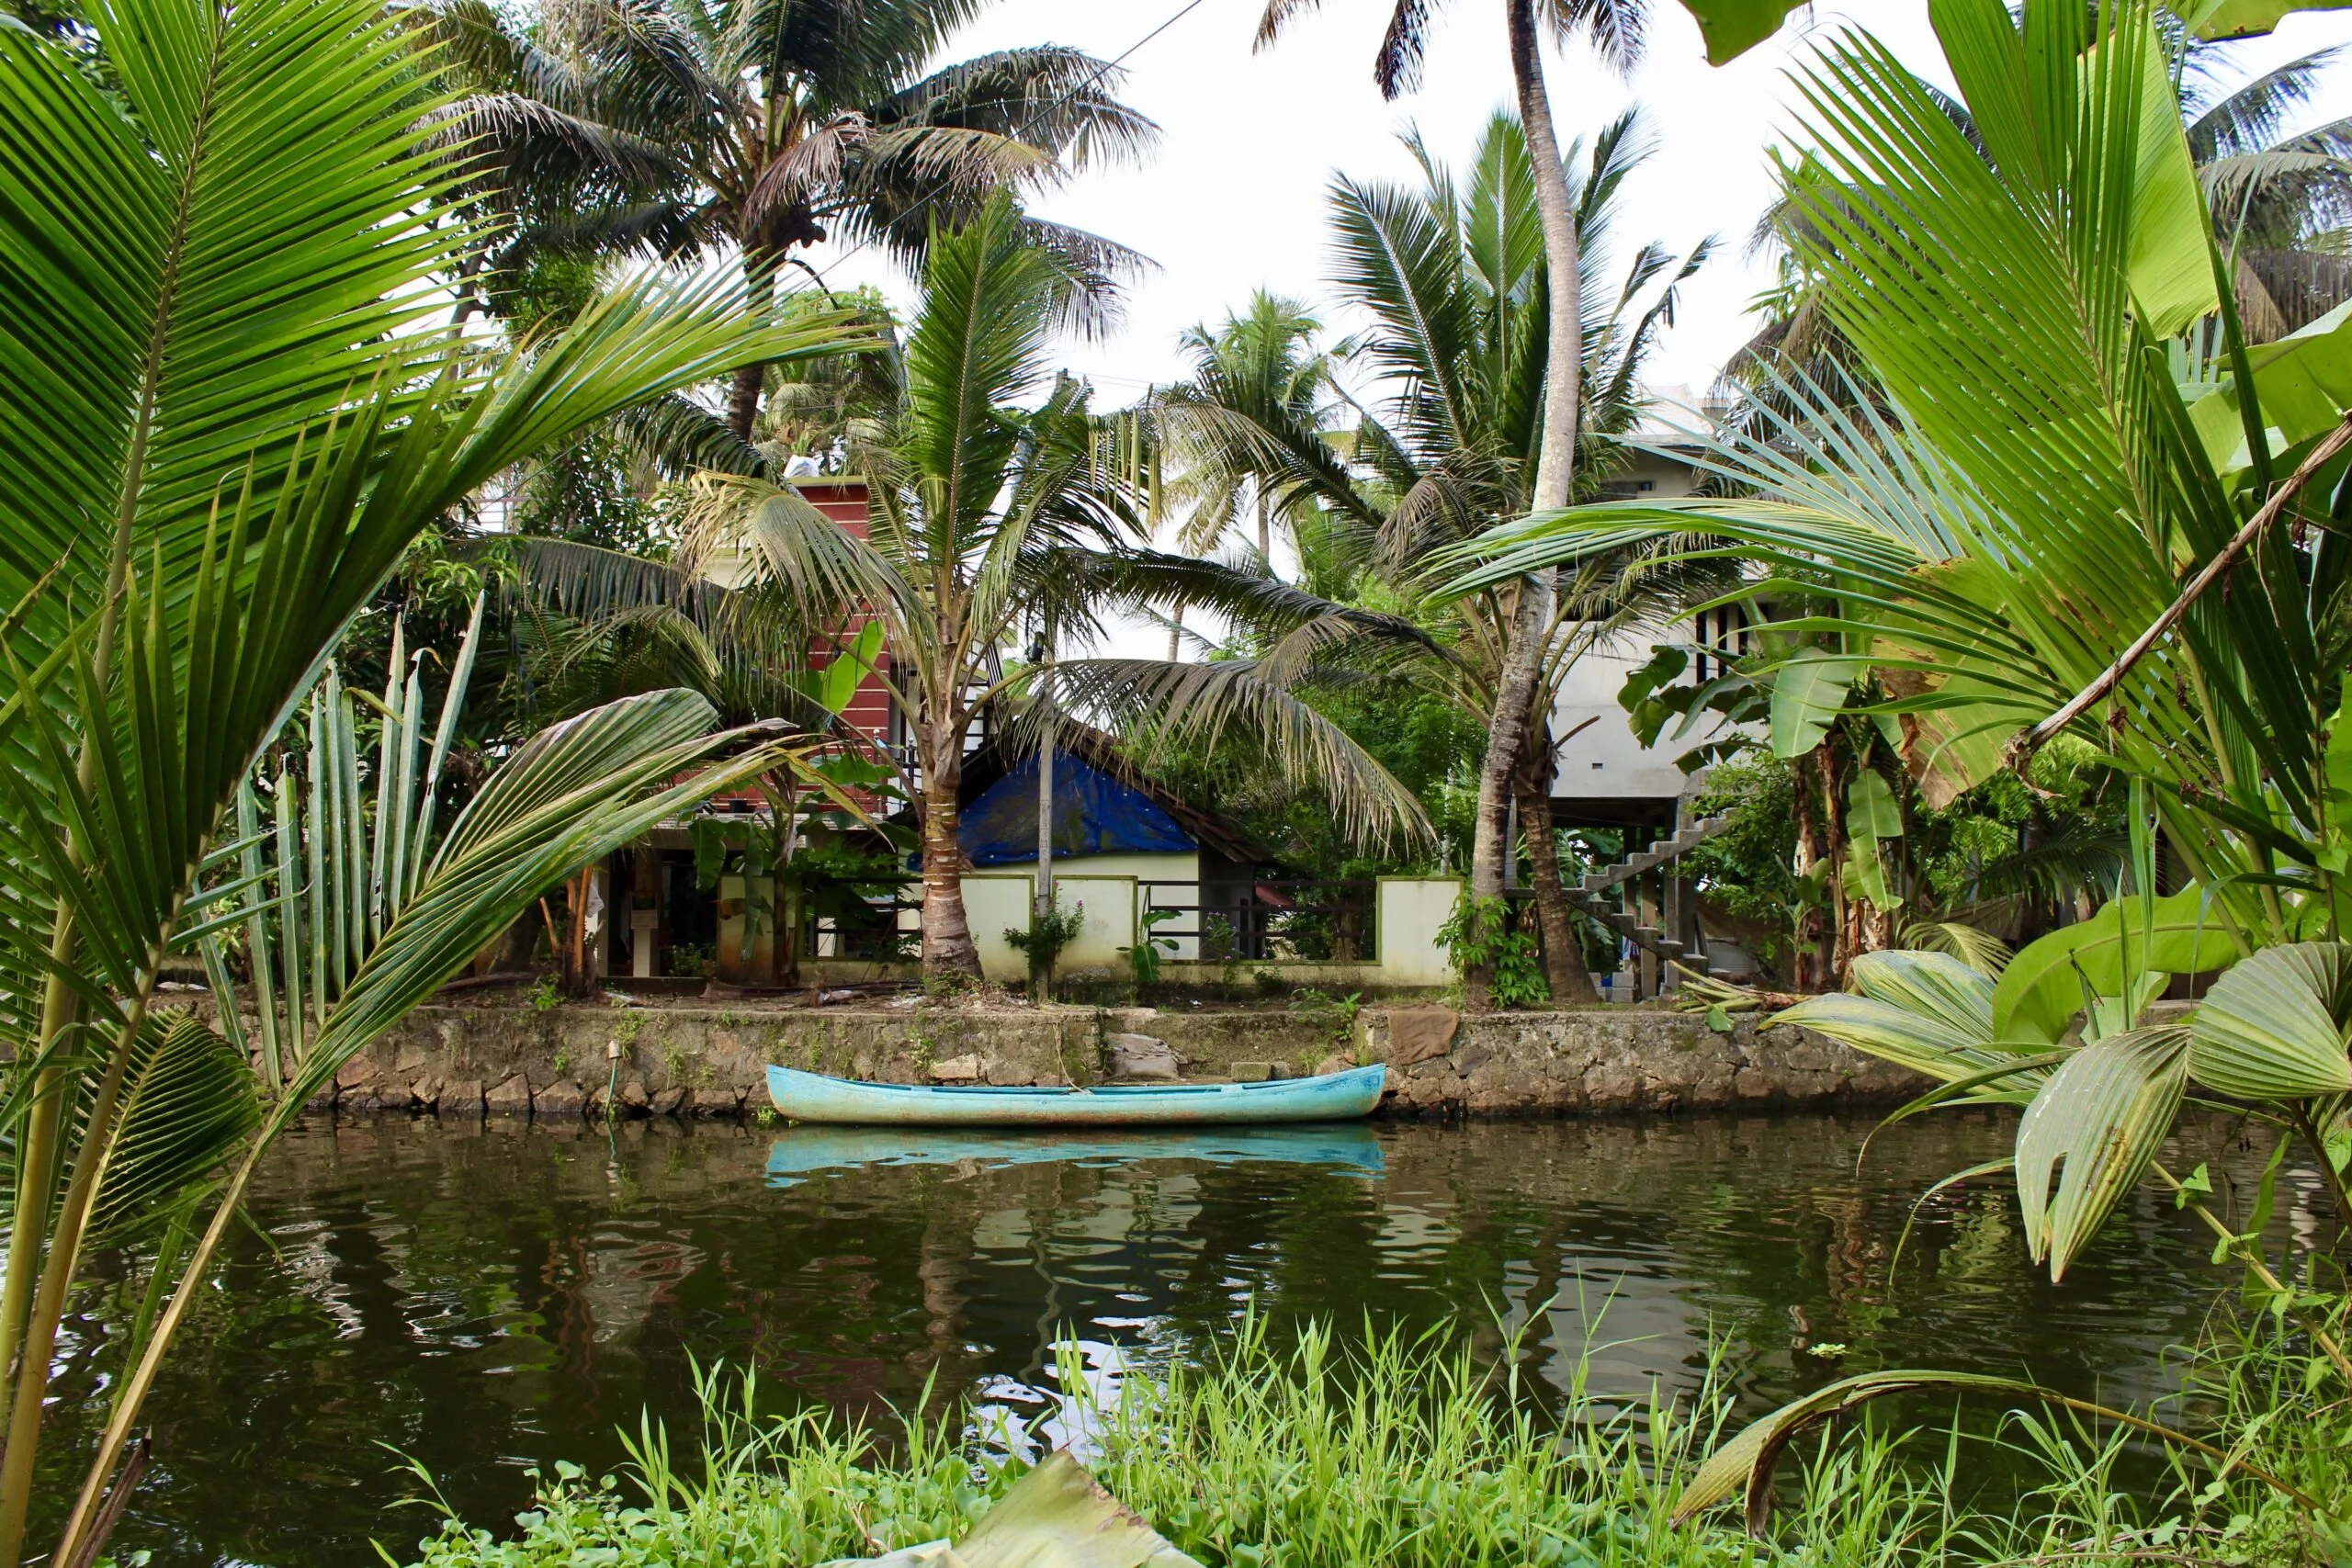 A canoe parked beside a canalside house in a village in Alleppey.